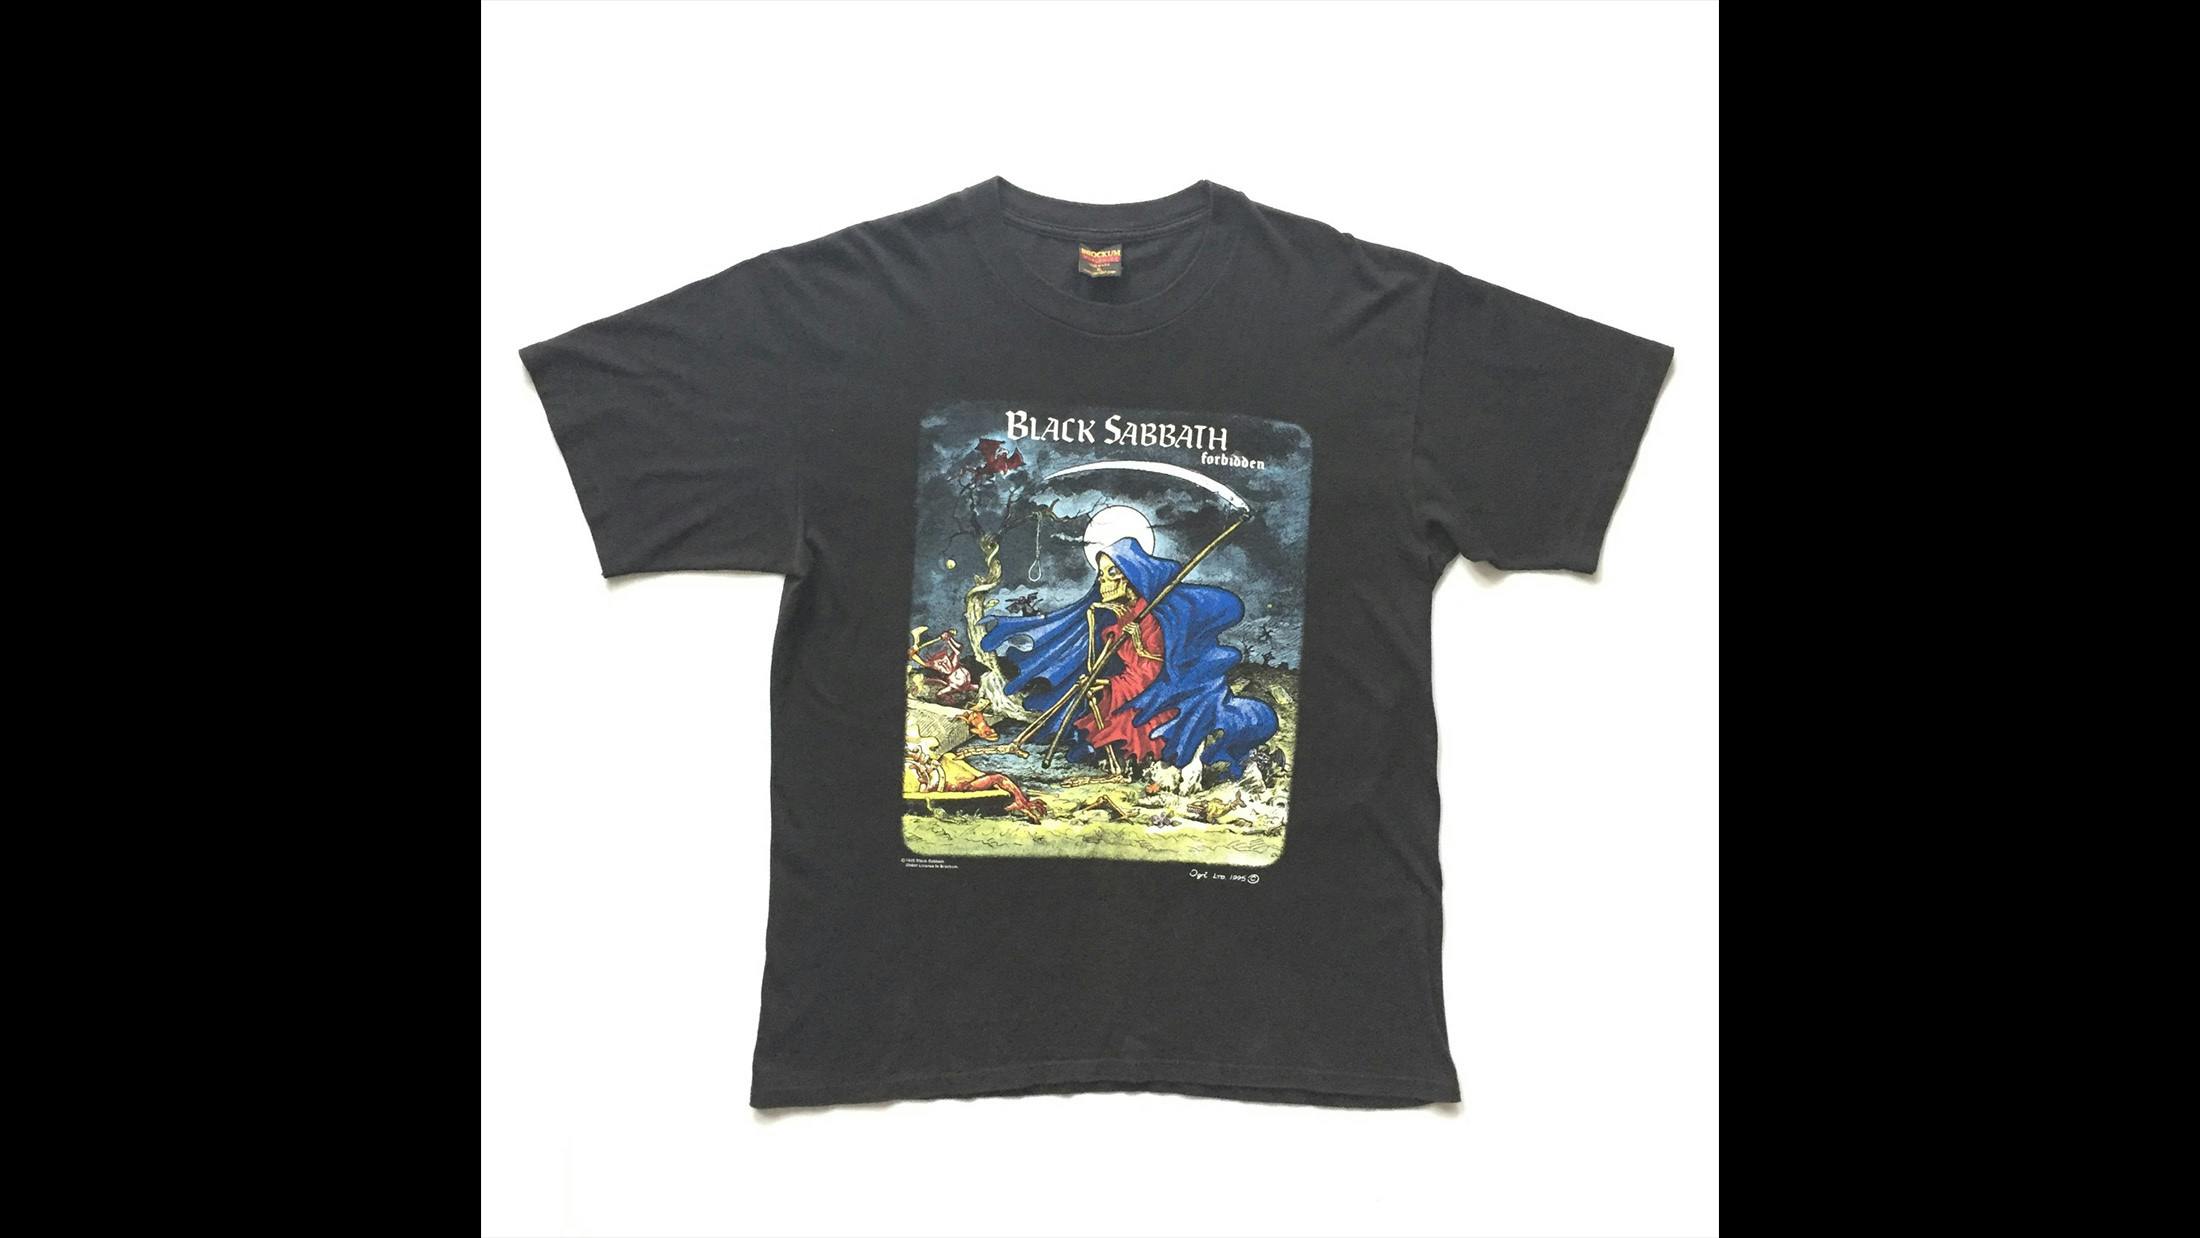 27 years after forming Sabbath, they were still putting out awesome tees. This one featured artwork from eighteenth studio album ‘Forbidden’.